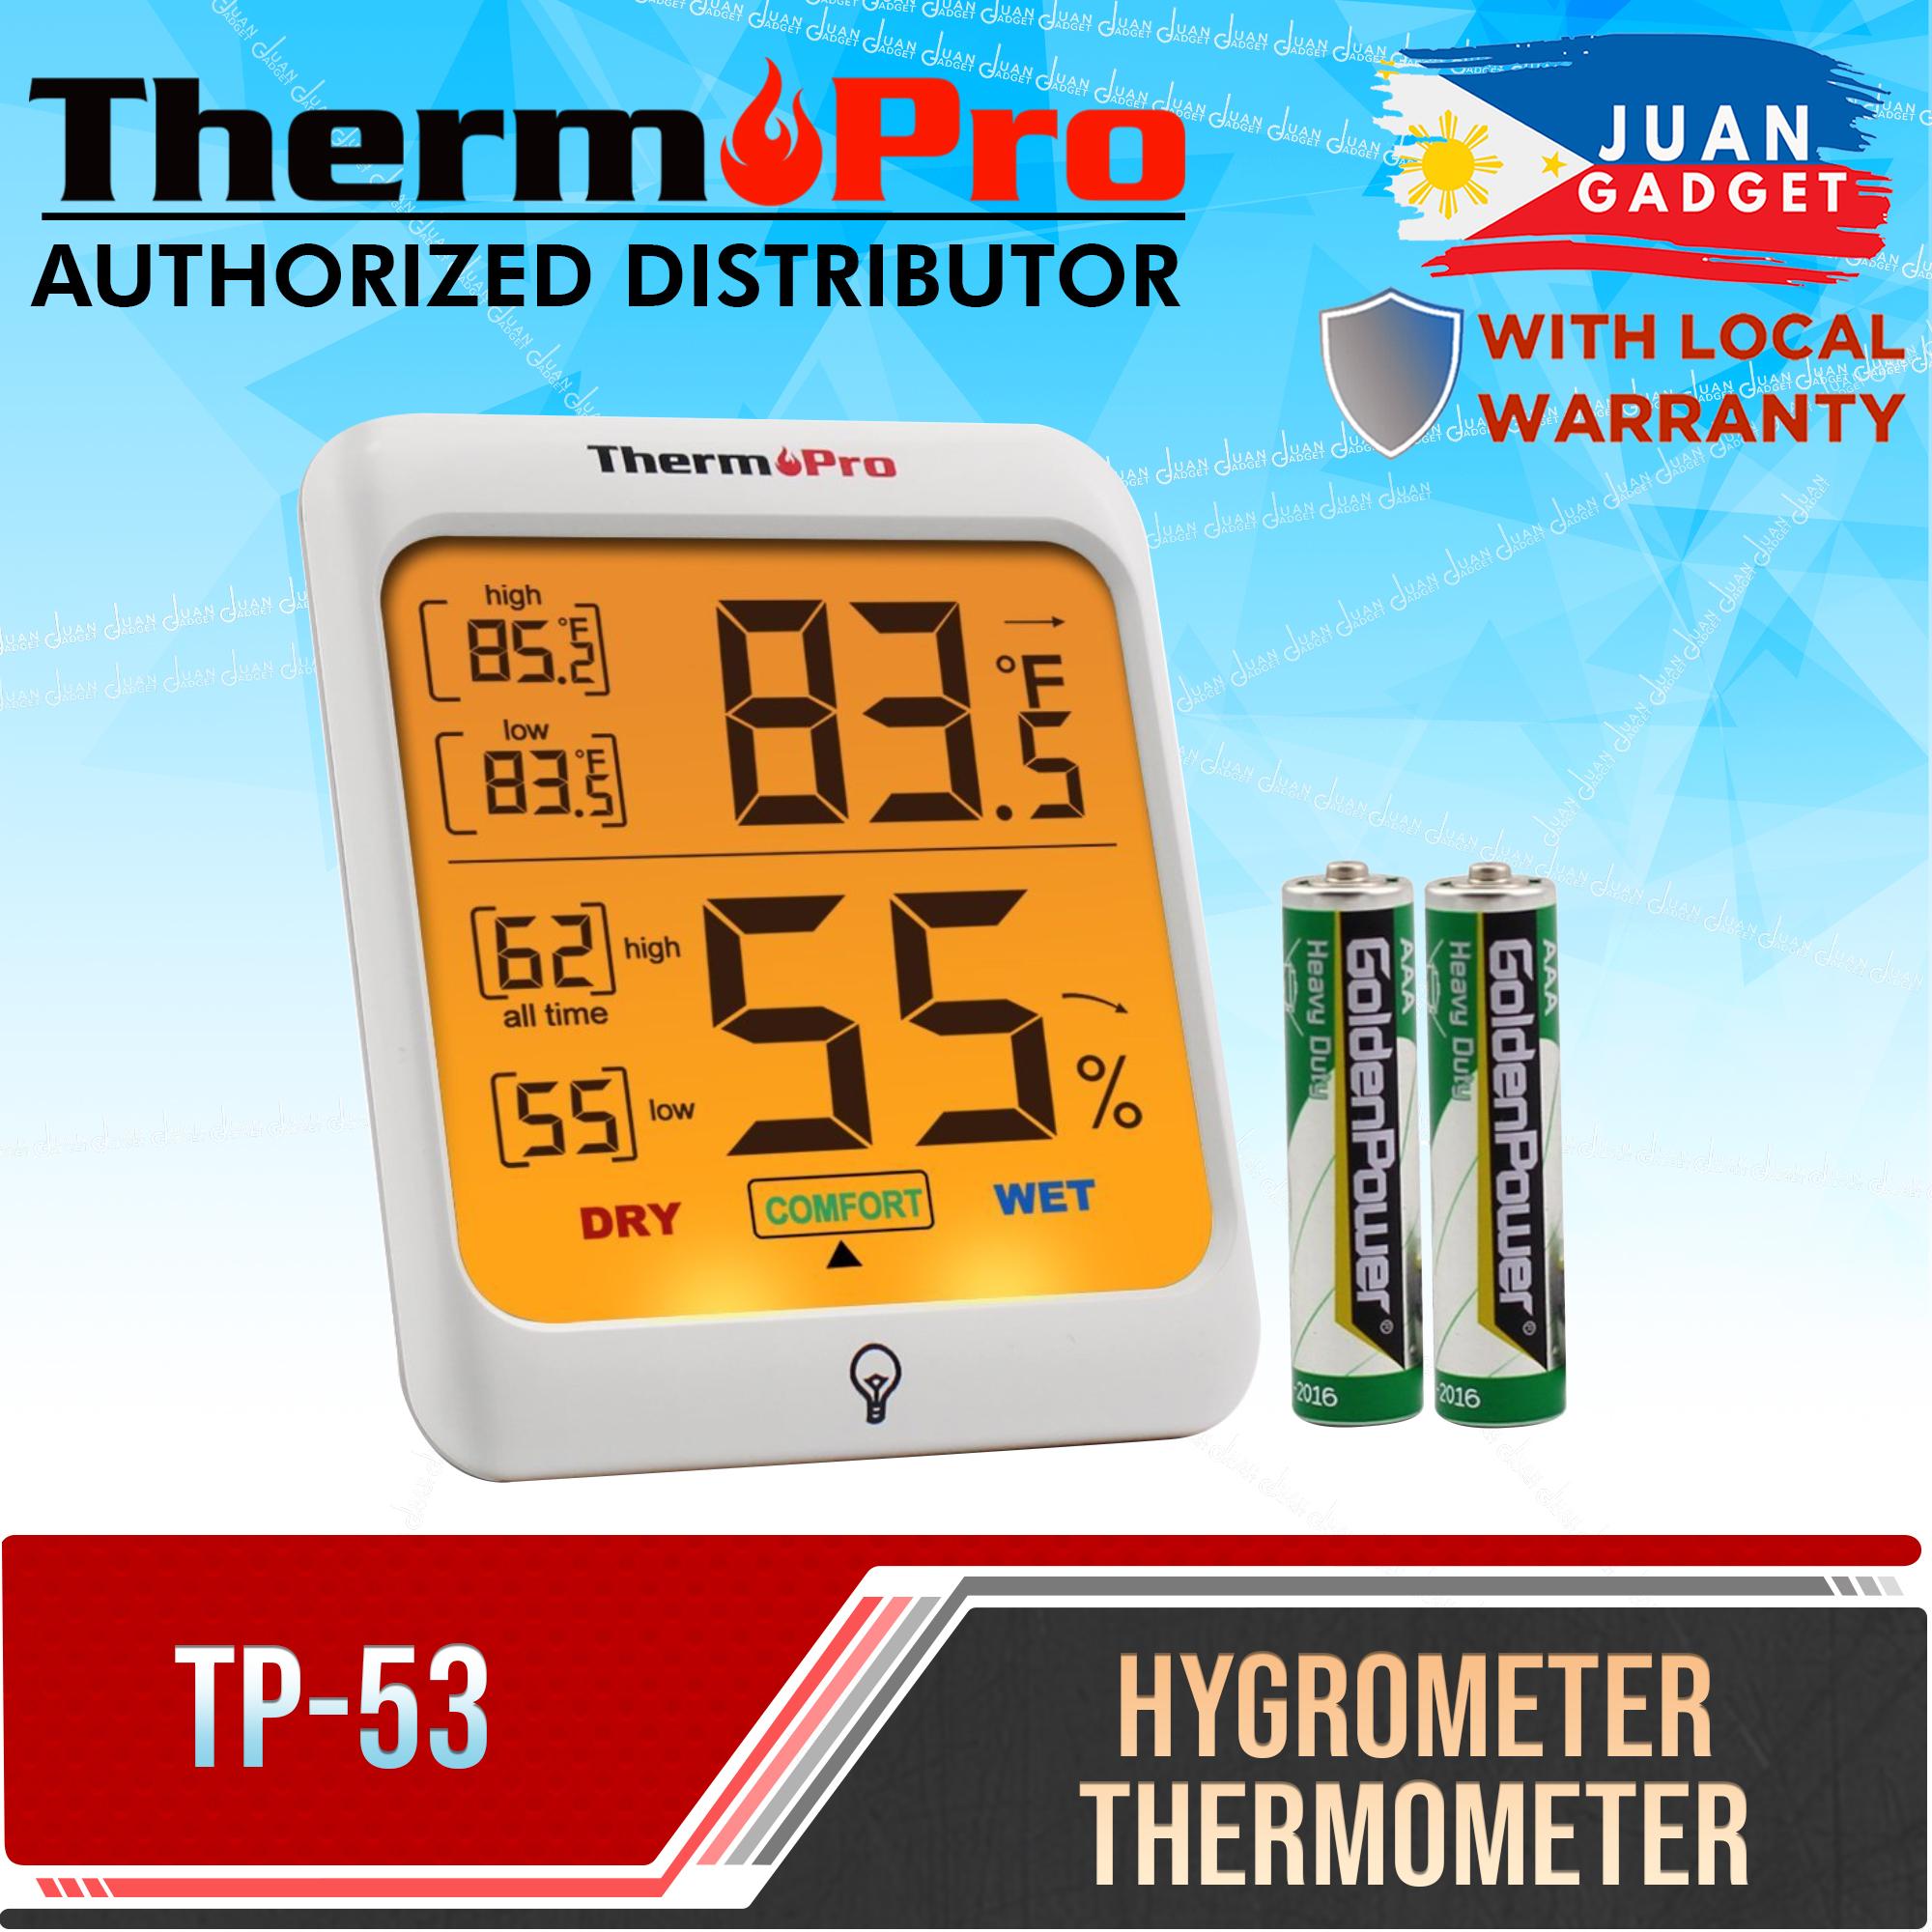 ThermoPro TP53 Hygrometer Humidity Gauge Indicator Digital Indoor  Thermometer Room Temperature and Humidity Monitor with Touch Backlight  price in Saudi Arabia,  Saudi Arabia